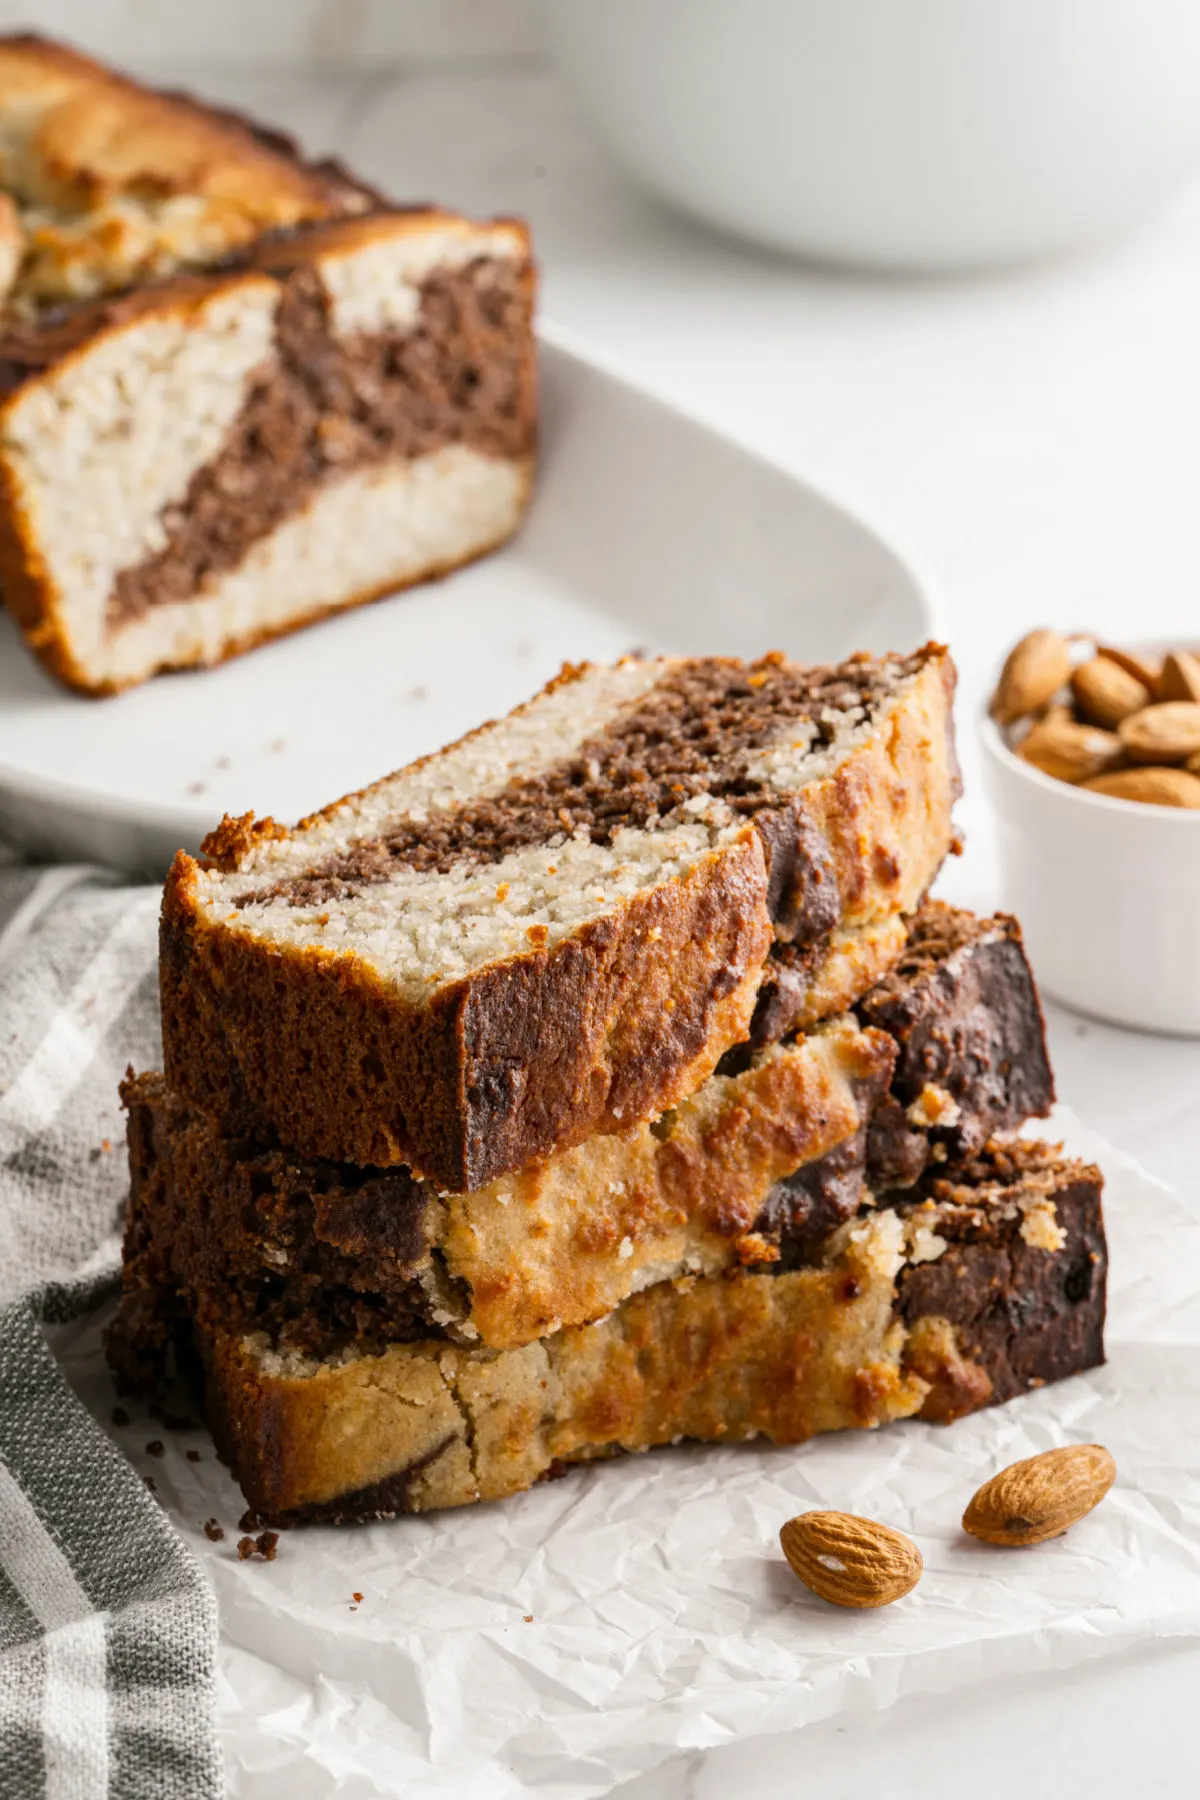 Three slices of sugar free banana bread stacked on plate.